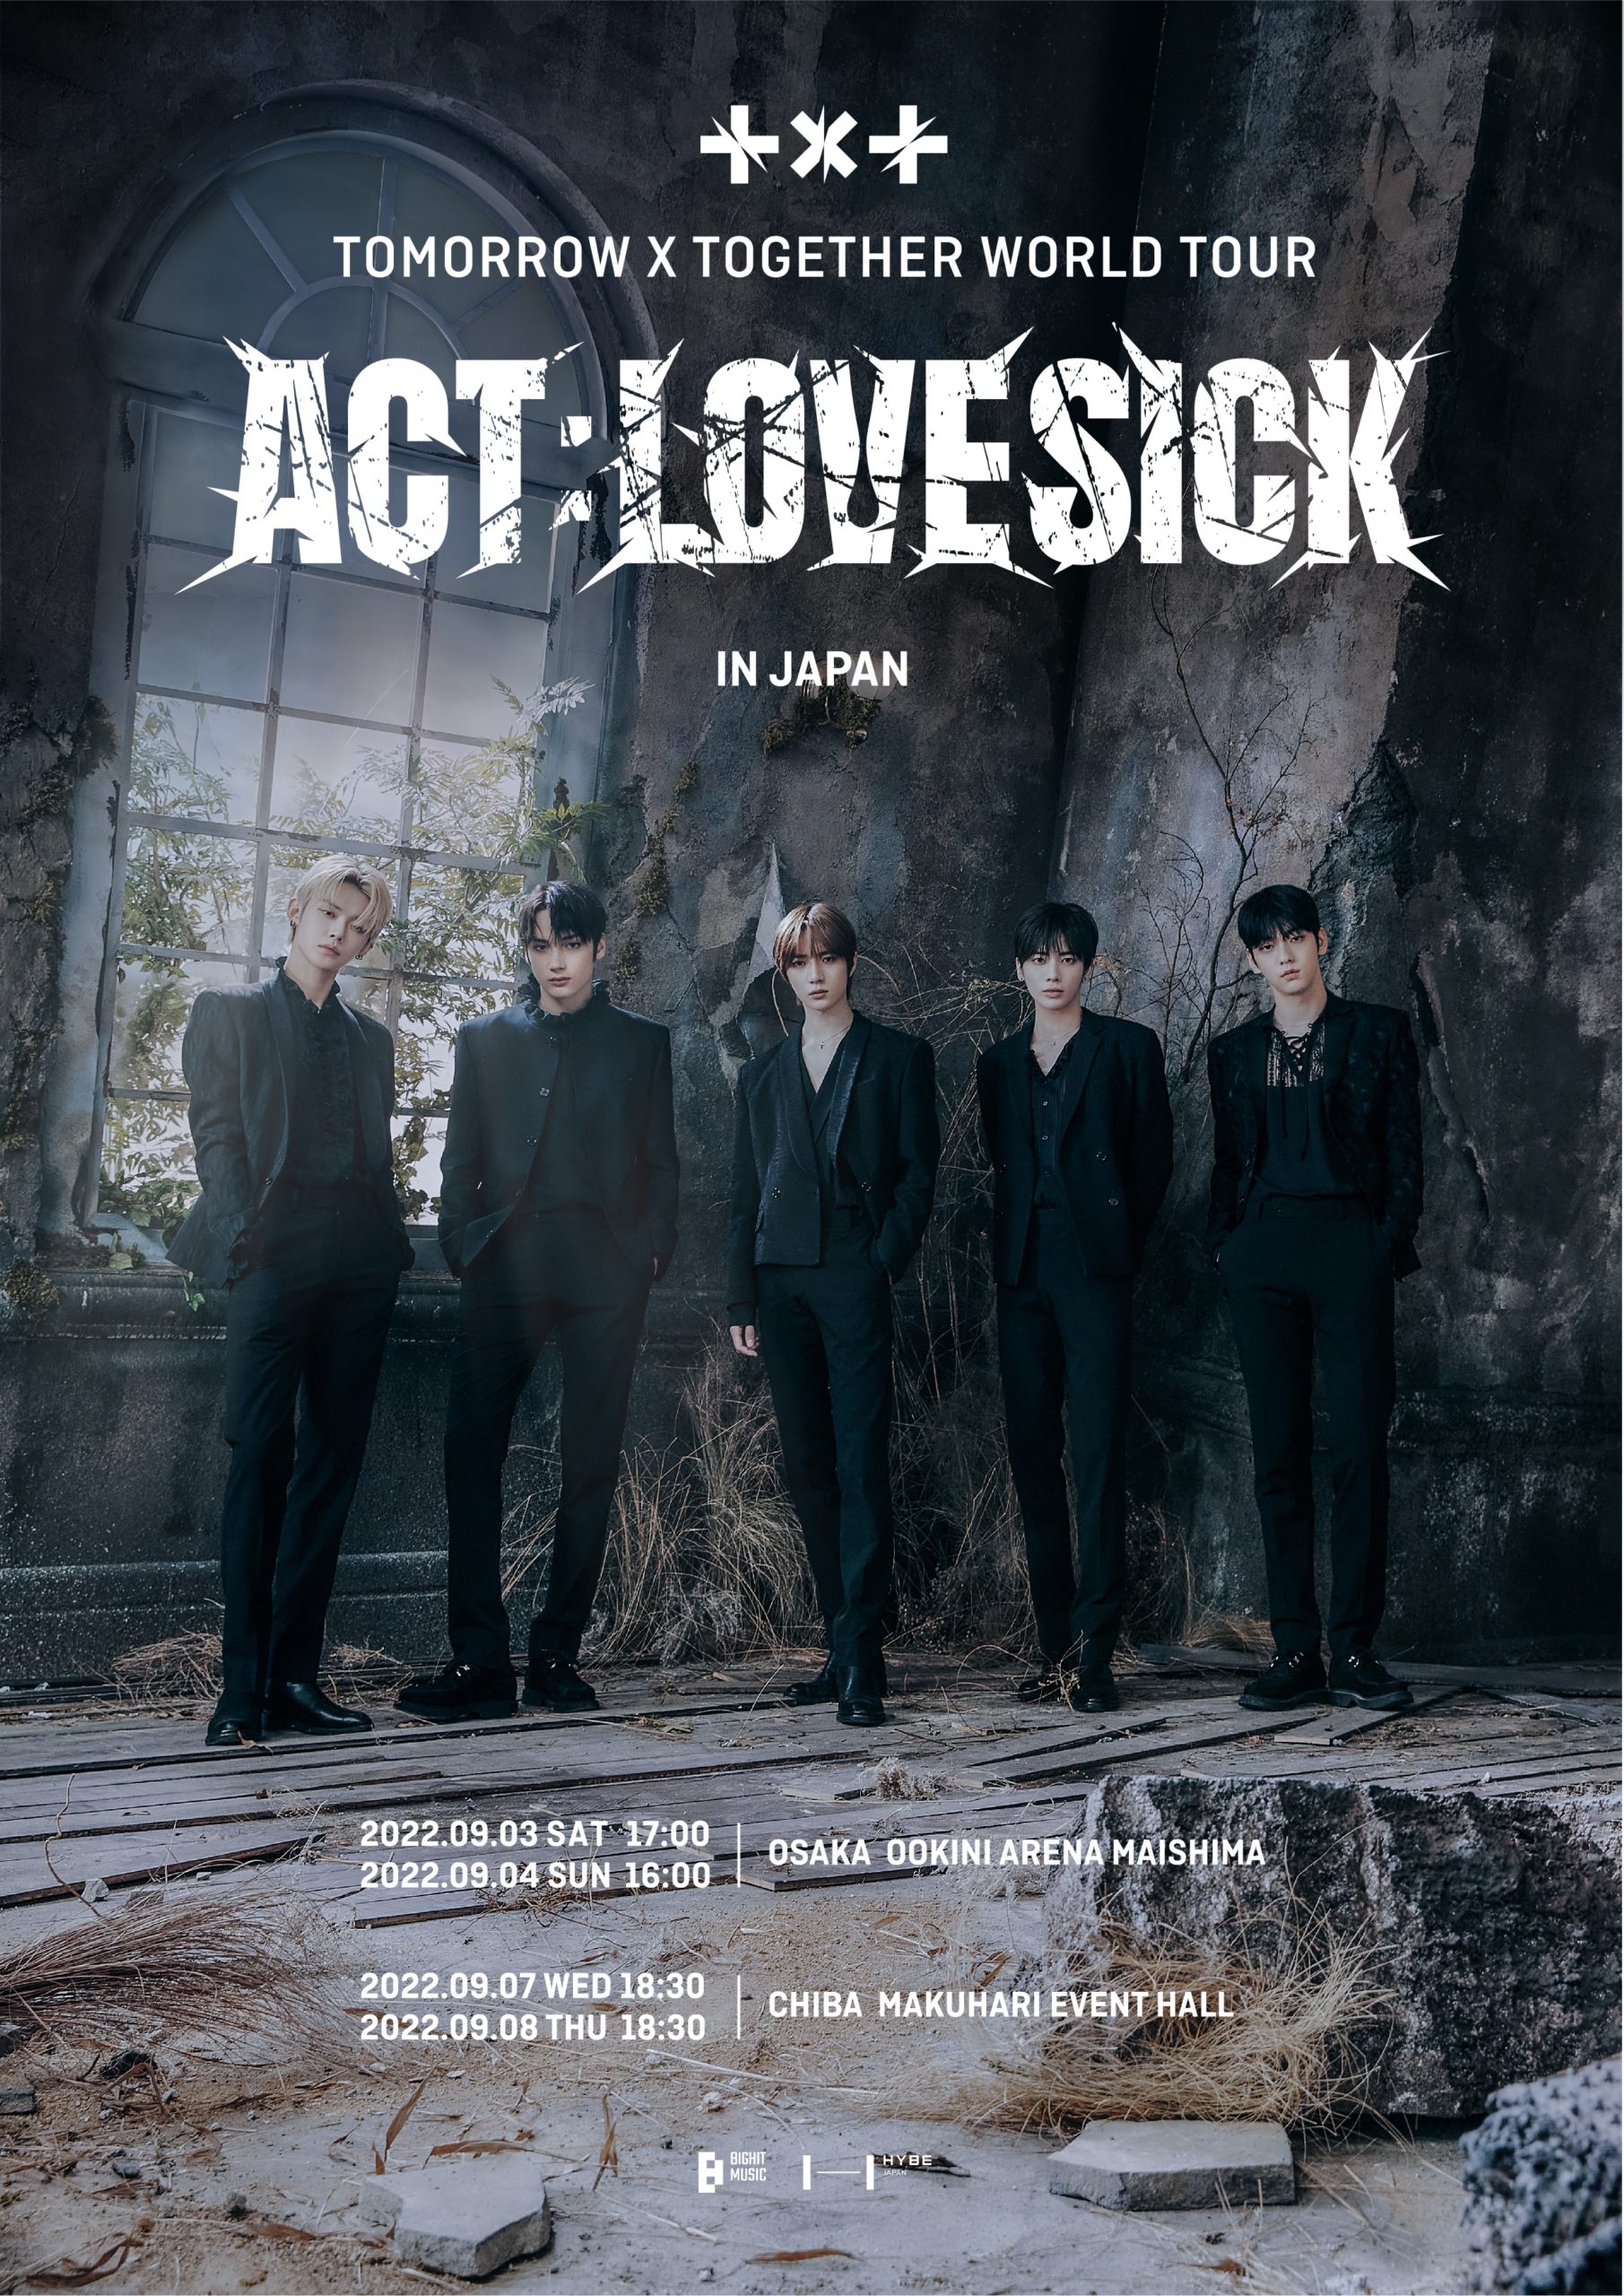 TOMORROW X TOGETHER WORLD TOUR ＜ACT : LOVE SICK＞ IN JAPAN ライブビューイング